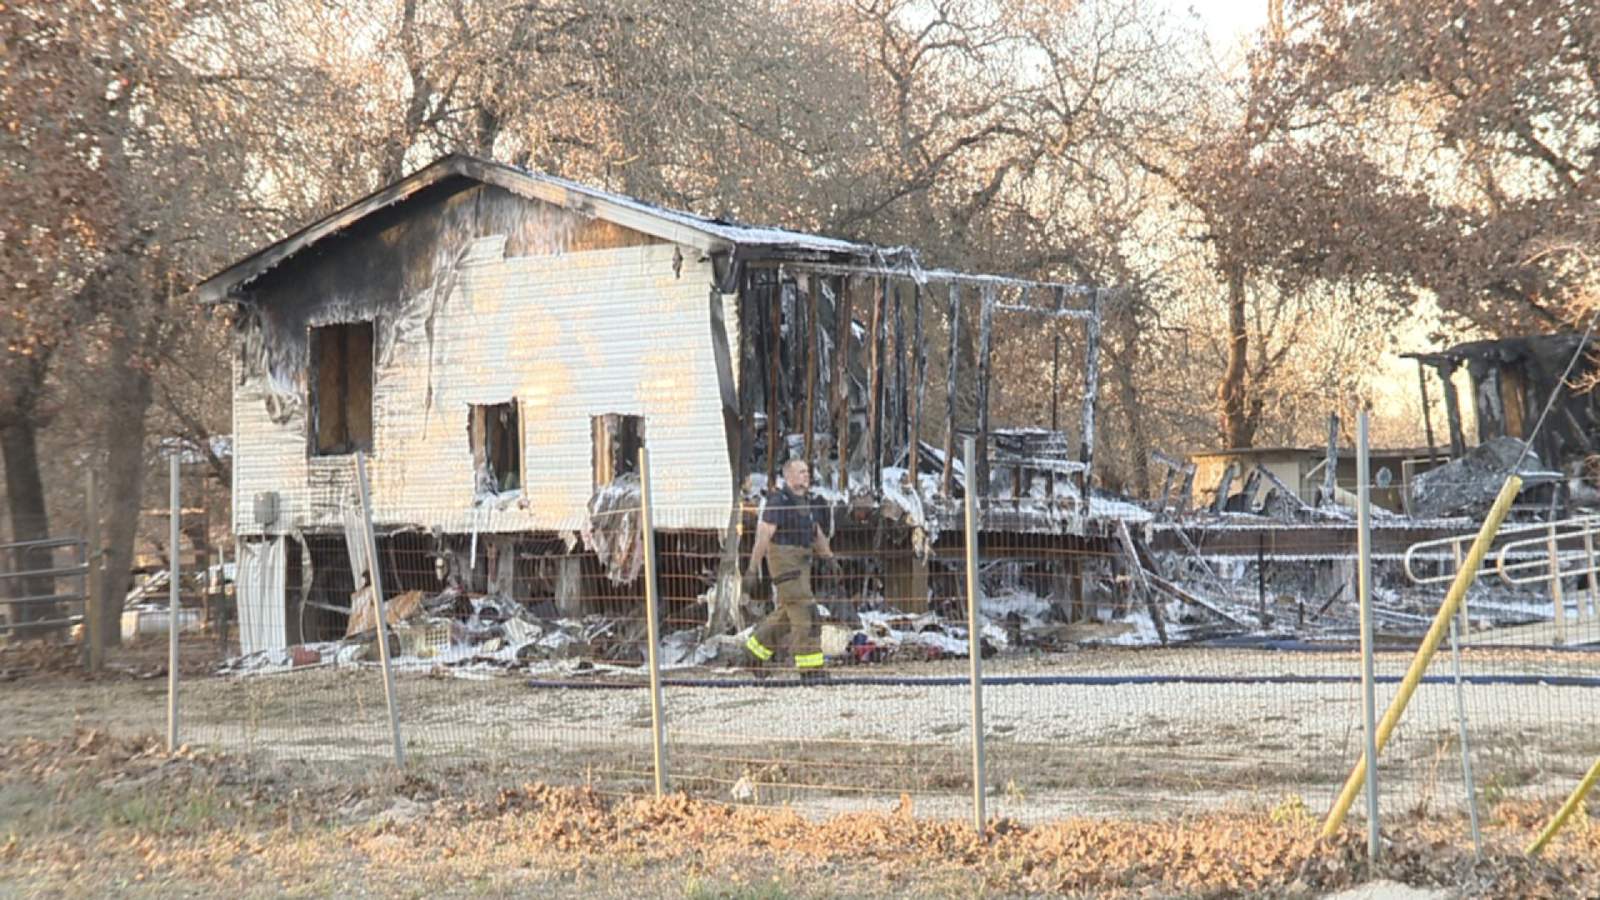 ‘I should’ve stayed where I was at’: Adkins man loses home to fire on his birthday